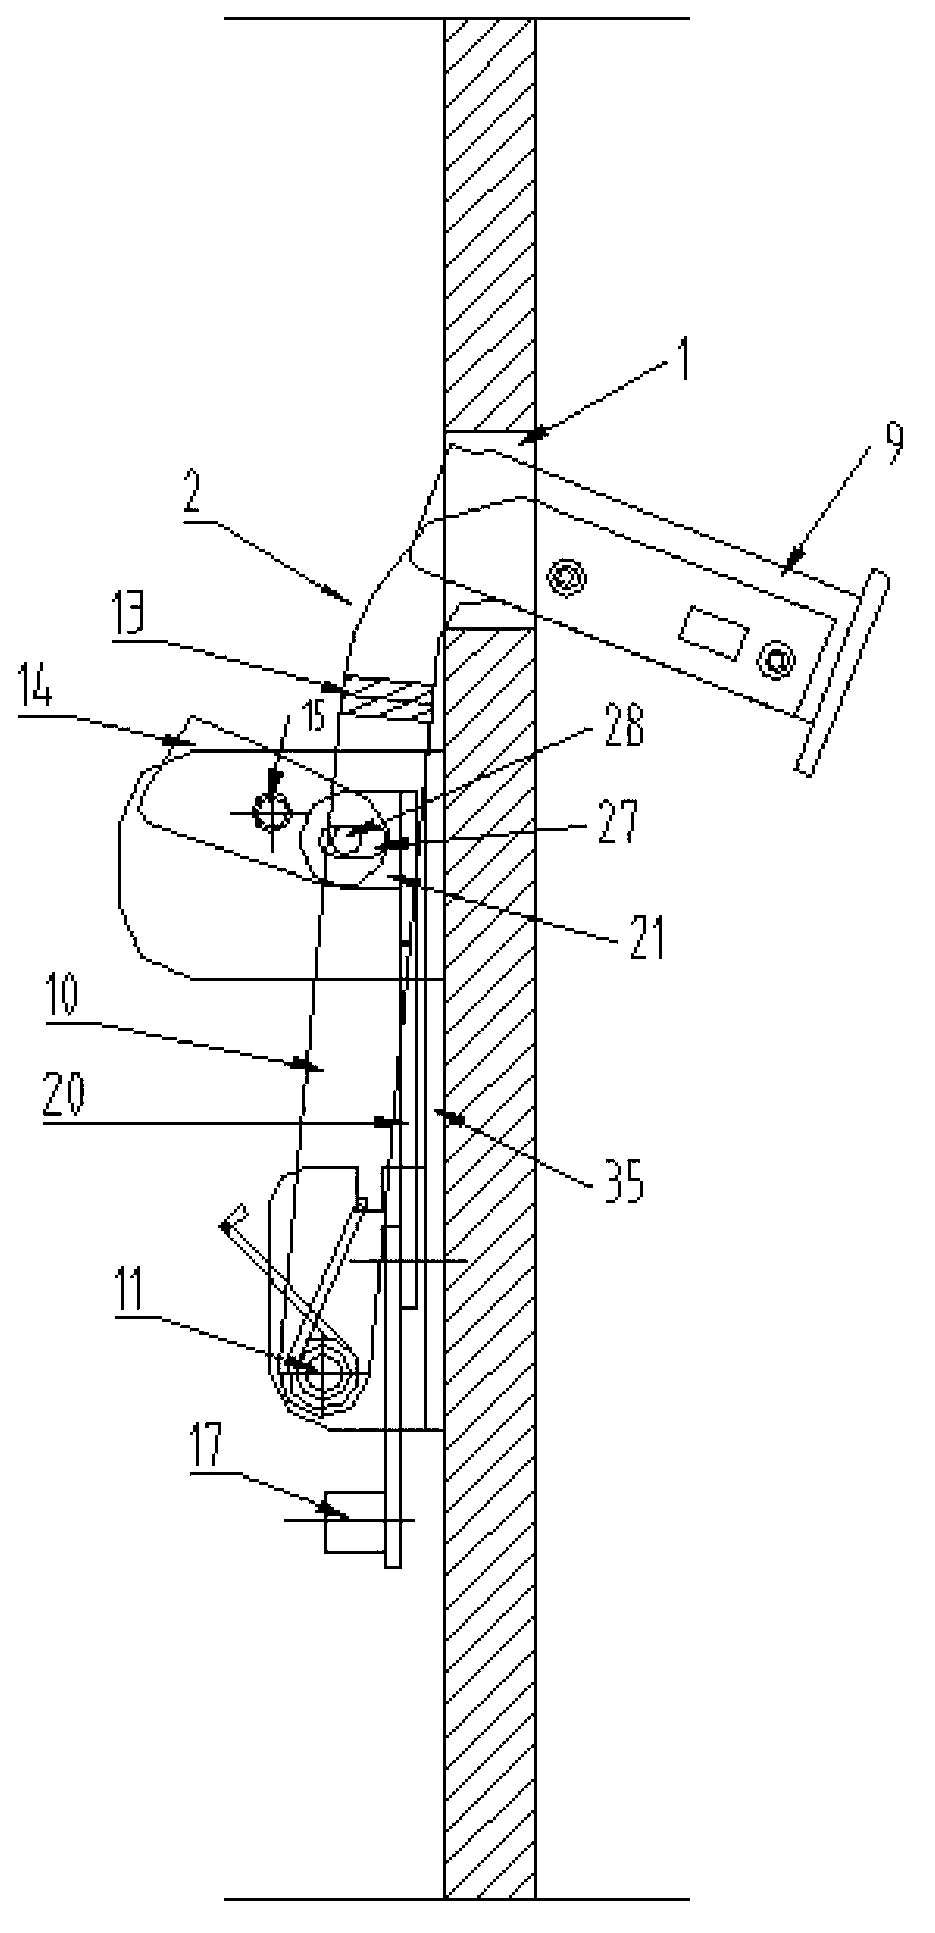 Concealed keyboard device of electronic lock